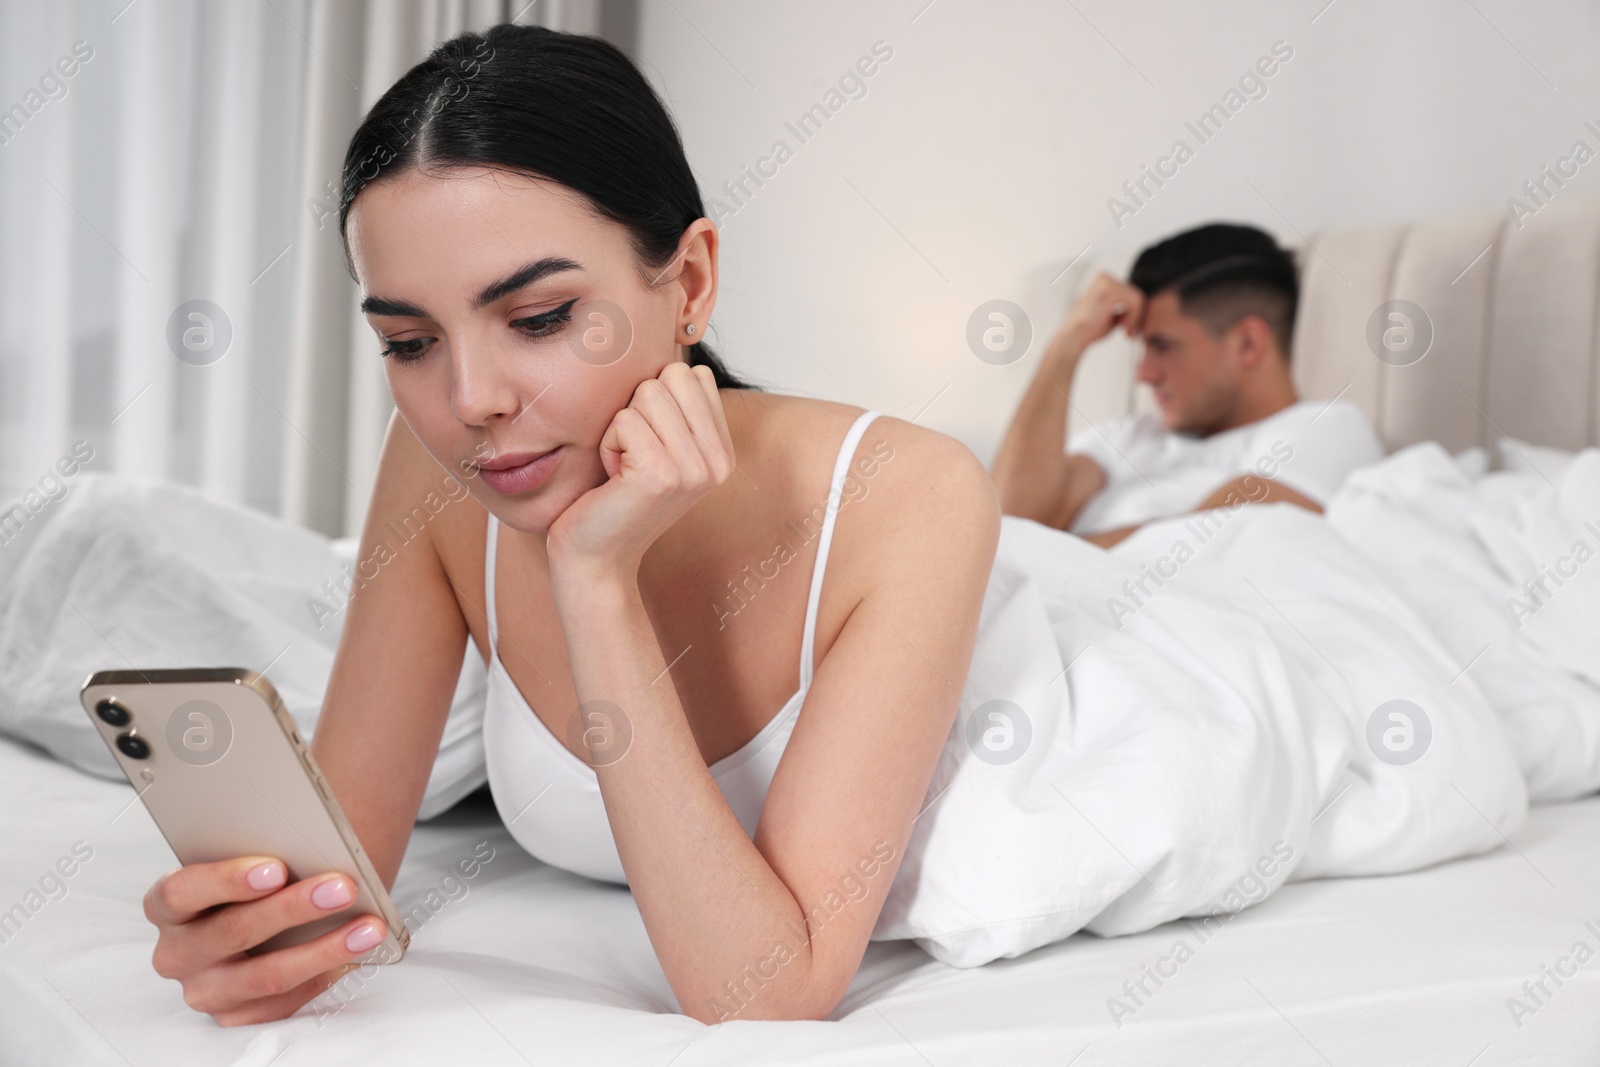 Photo of Internet addiction. Woman with smartphone ignoring her boyfriend in bedroom